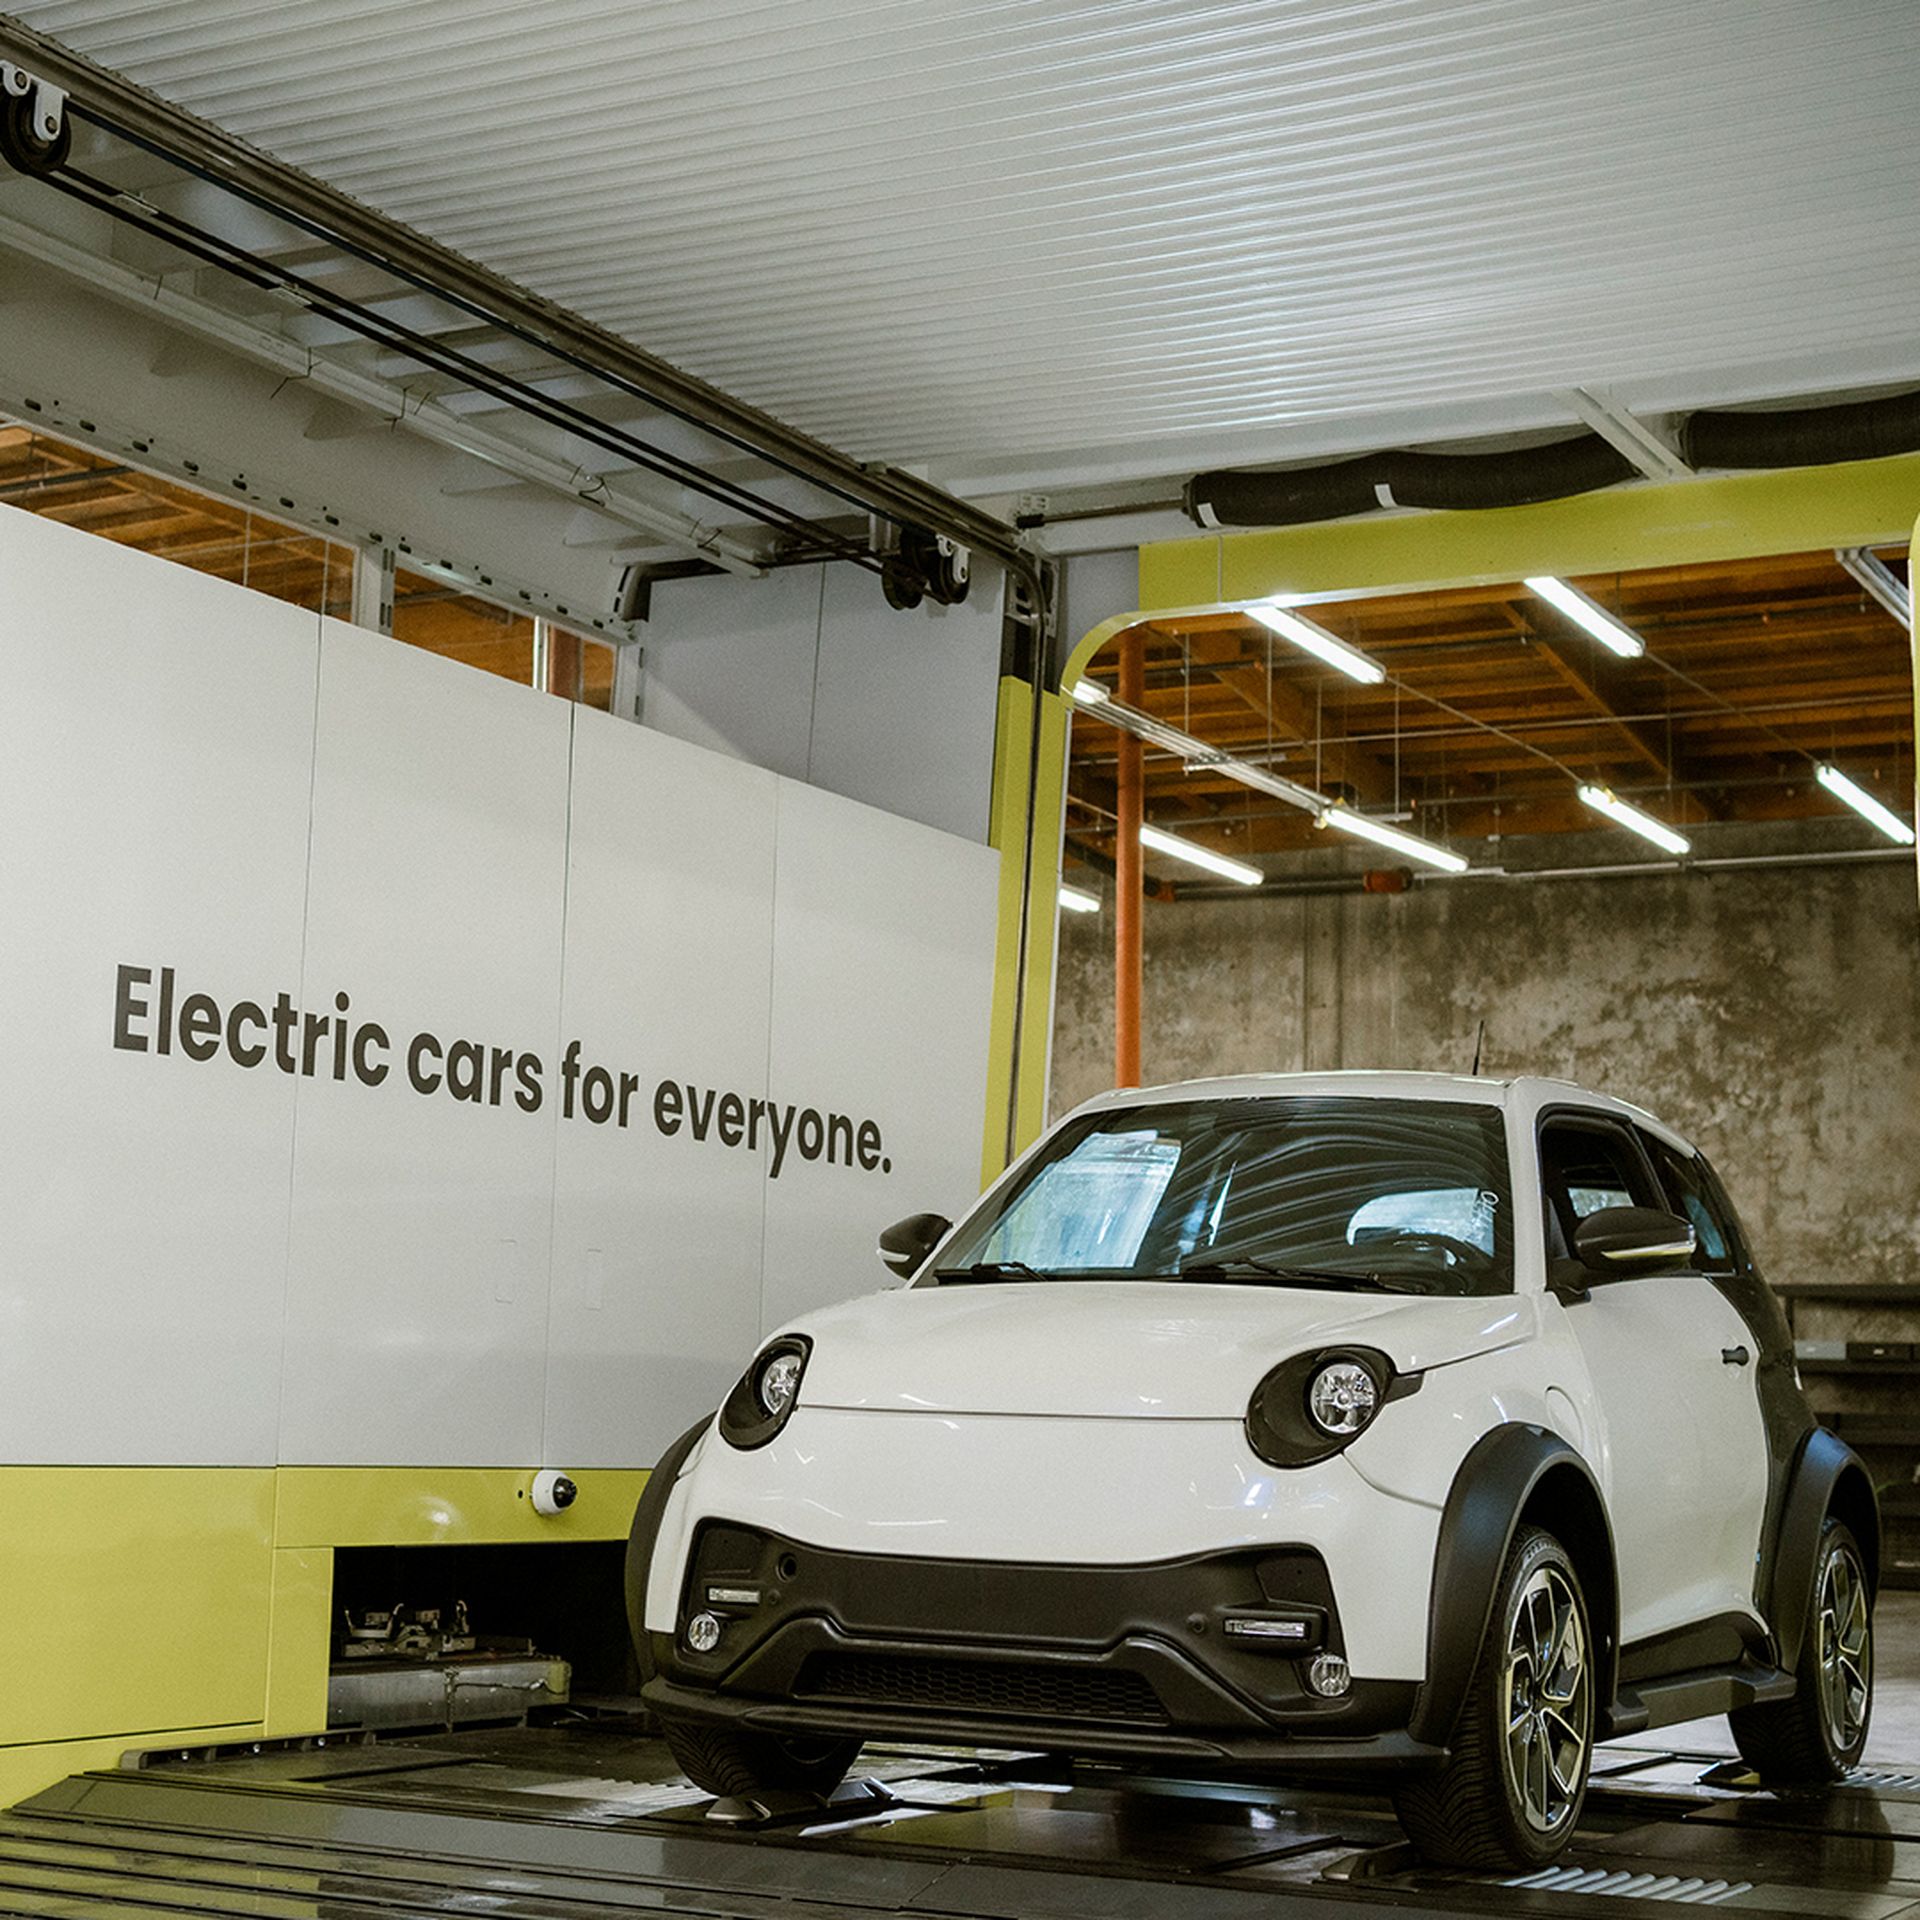 A photo of an electric car parked inside one of Ample's quick battery-swapping stations. 